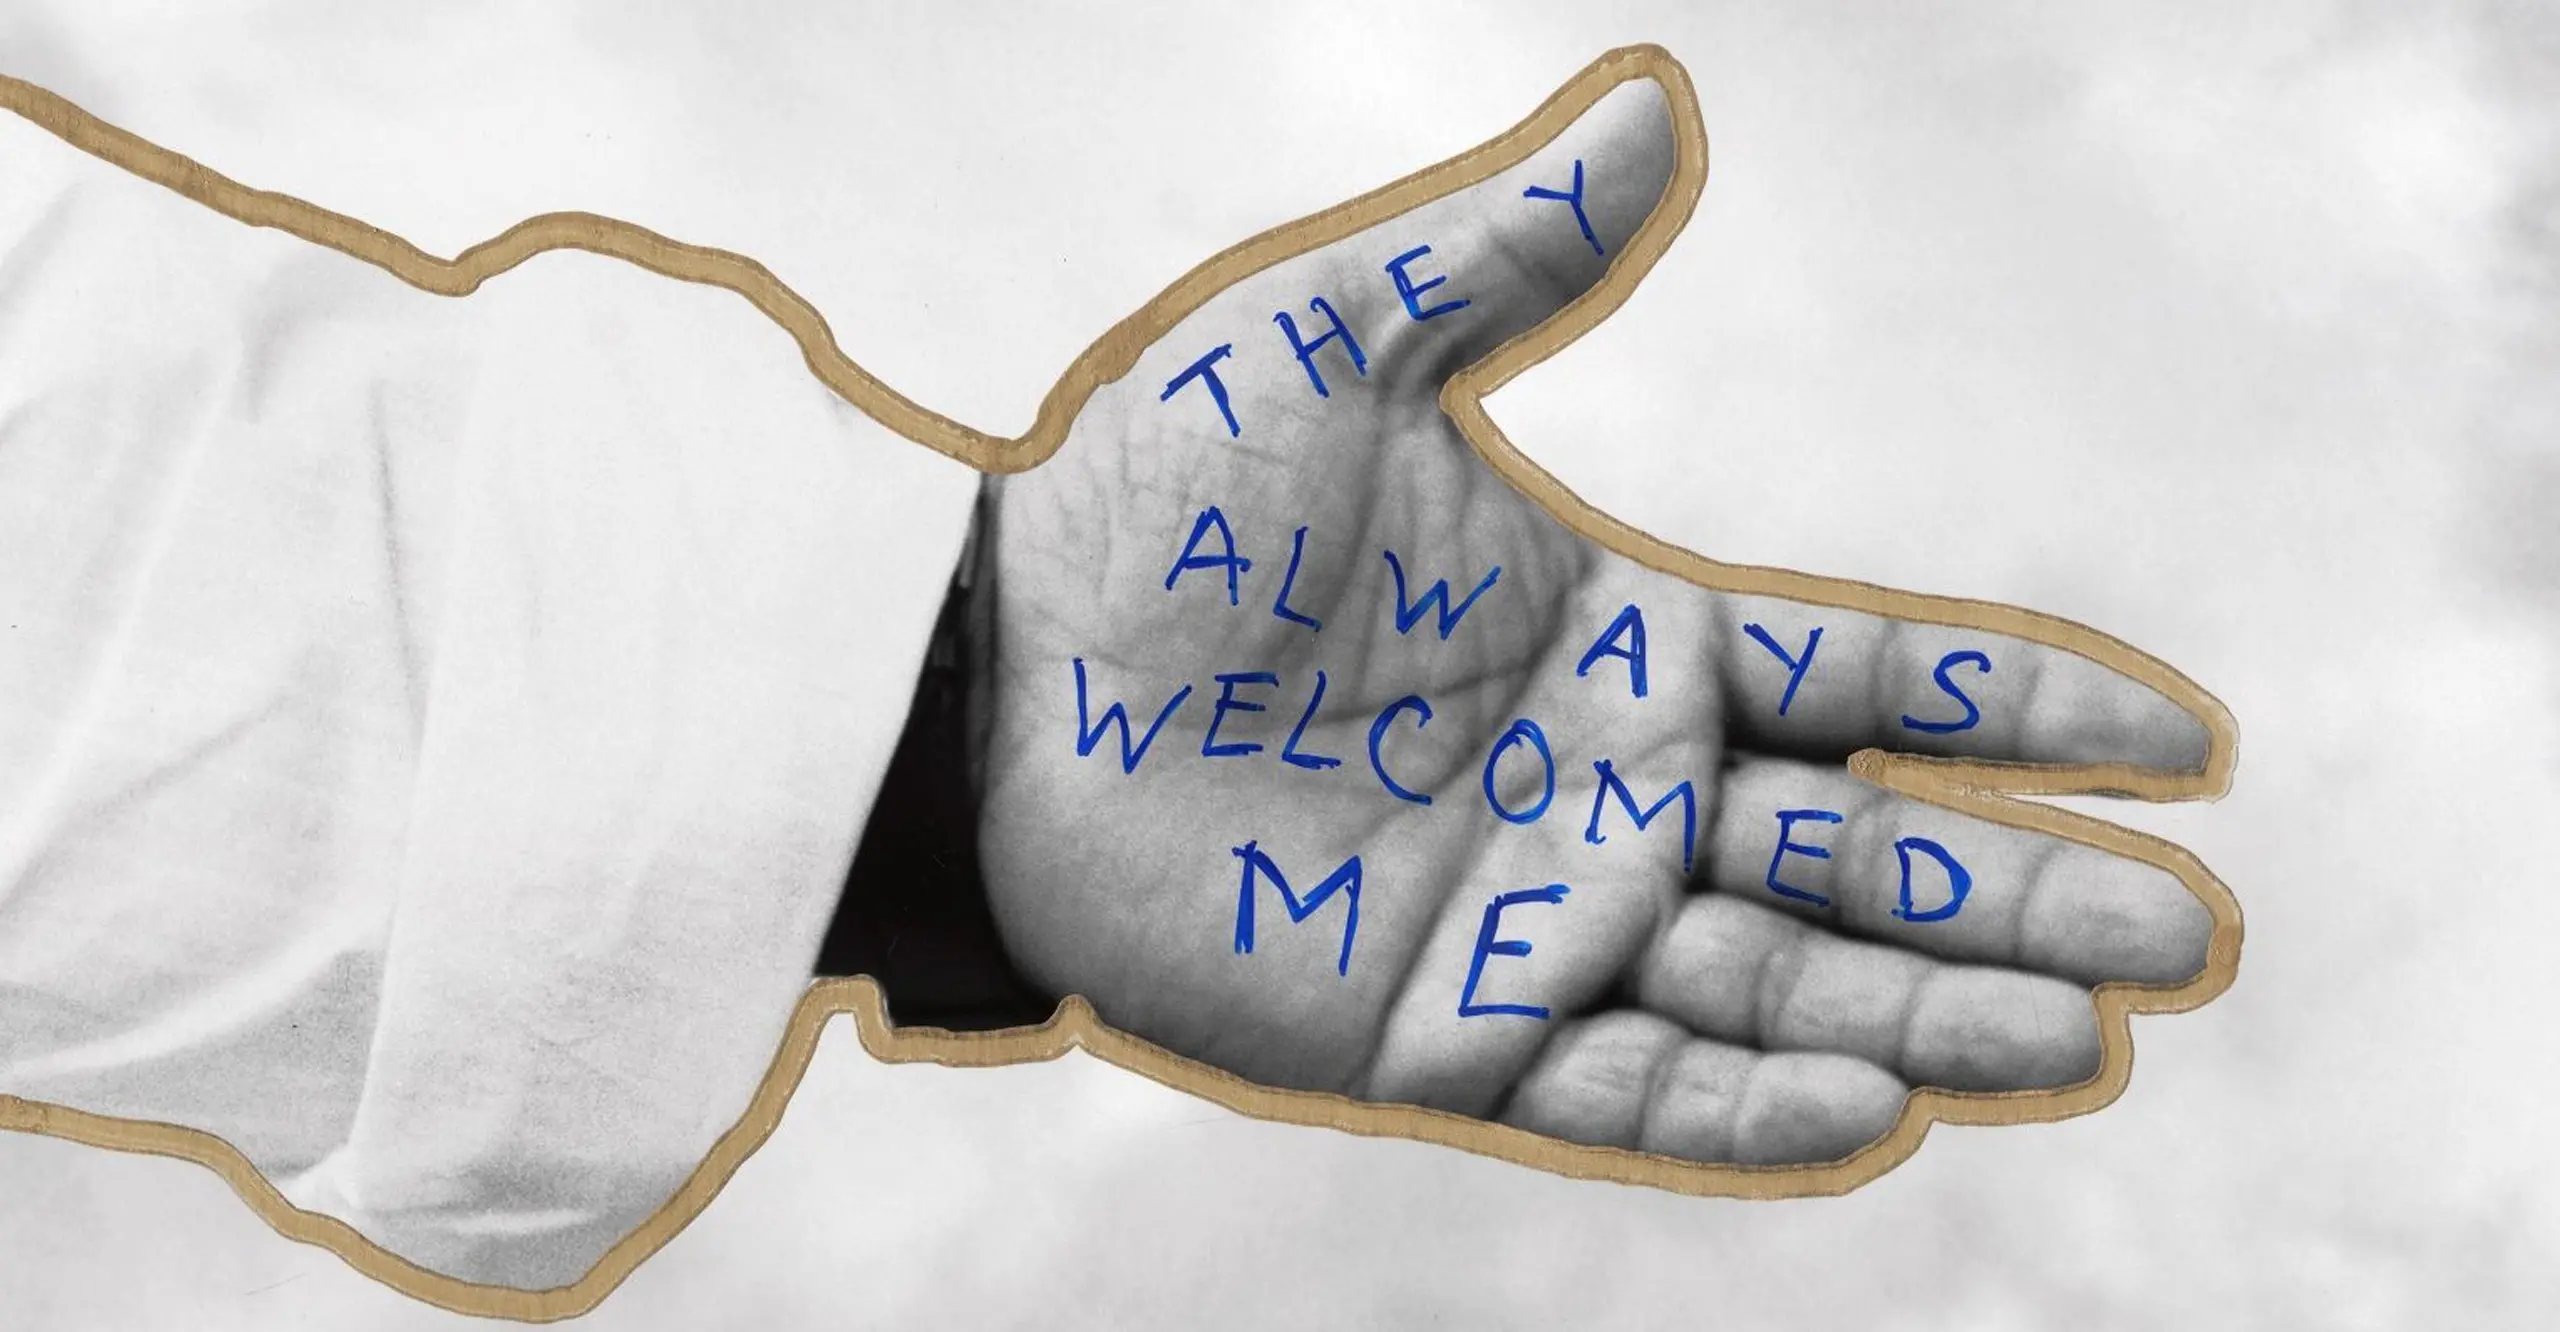 Black and white image of hand reaching out, with words 'They always welcomed me' drawn on the palm.